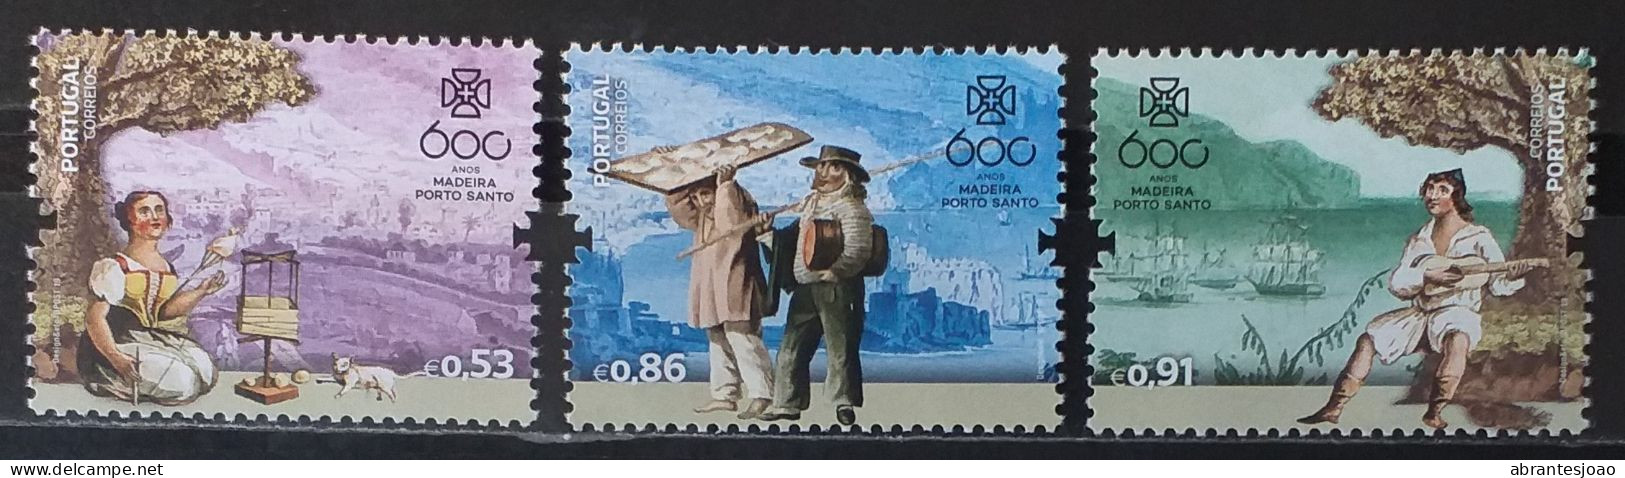 2019 - Portugal - MNH - 600 Years Since Discovery Of Madeira - 3 Stamps - Neufs